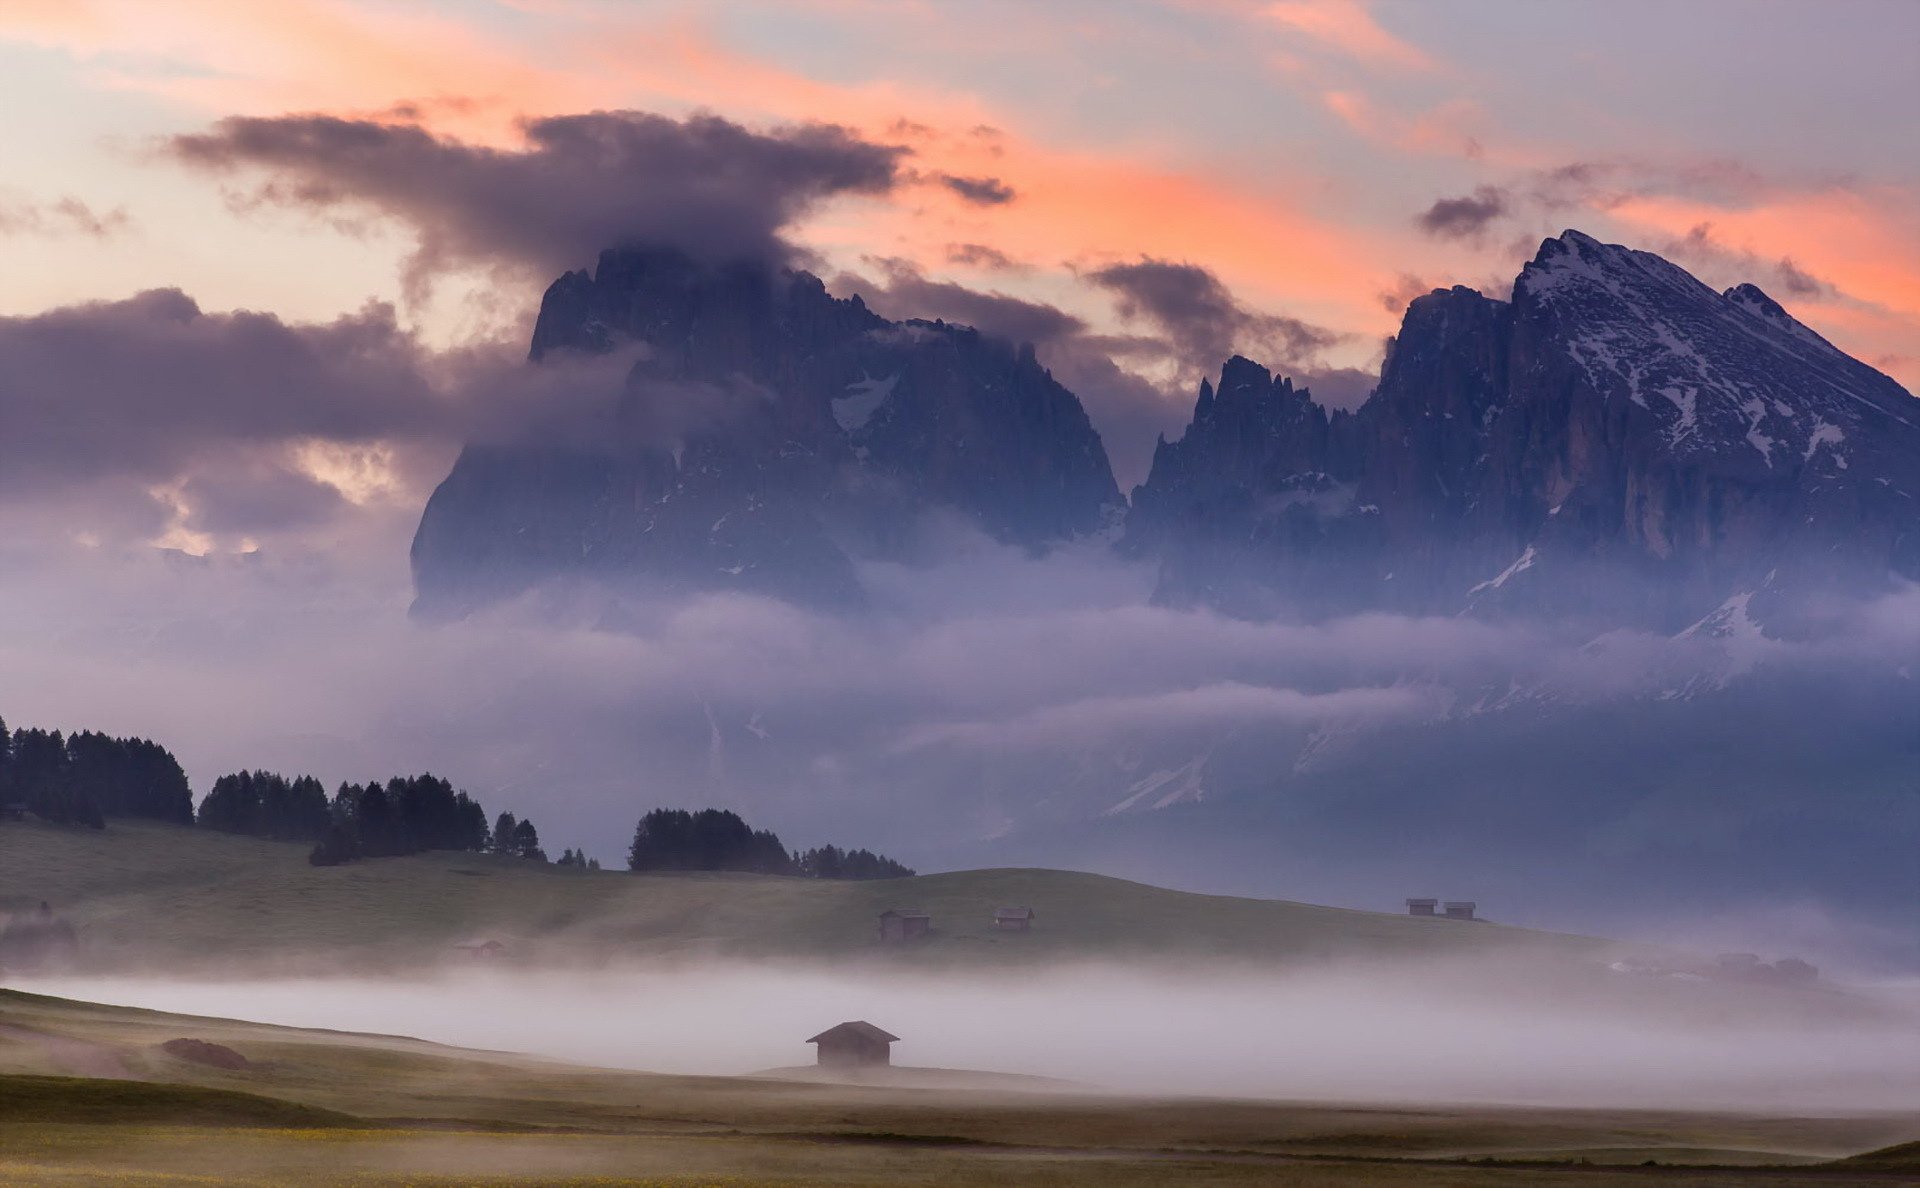 dolomite, Alps, Alps, Dolomite, Alps, Alps, Sunrise, Mountains, Sky, Clouds, Trees, Lawn, Grass, Fog, Home, Nature, Landscape Wallpaper